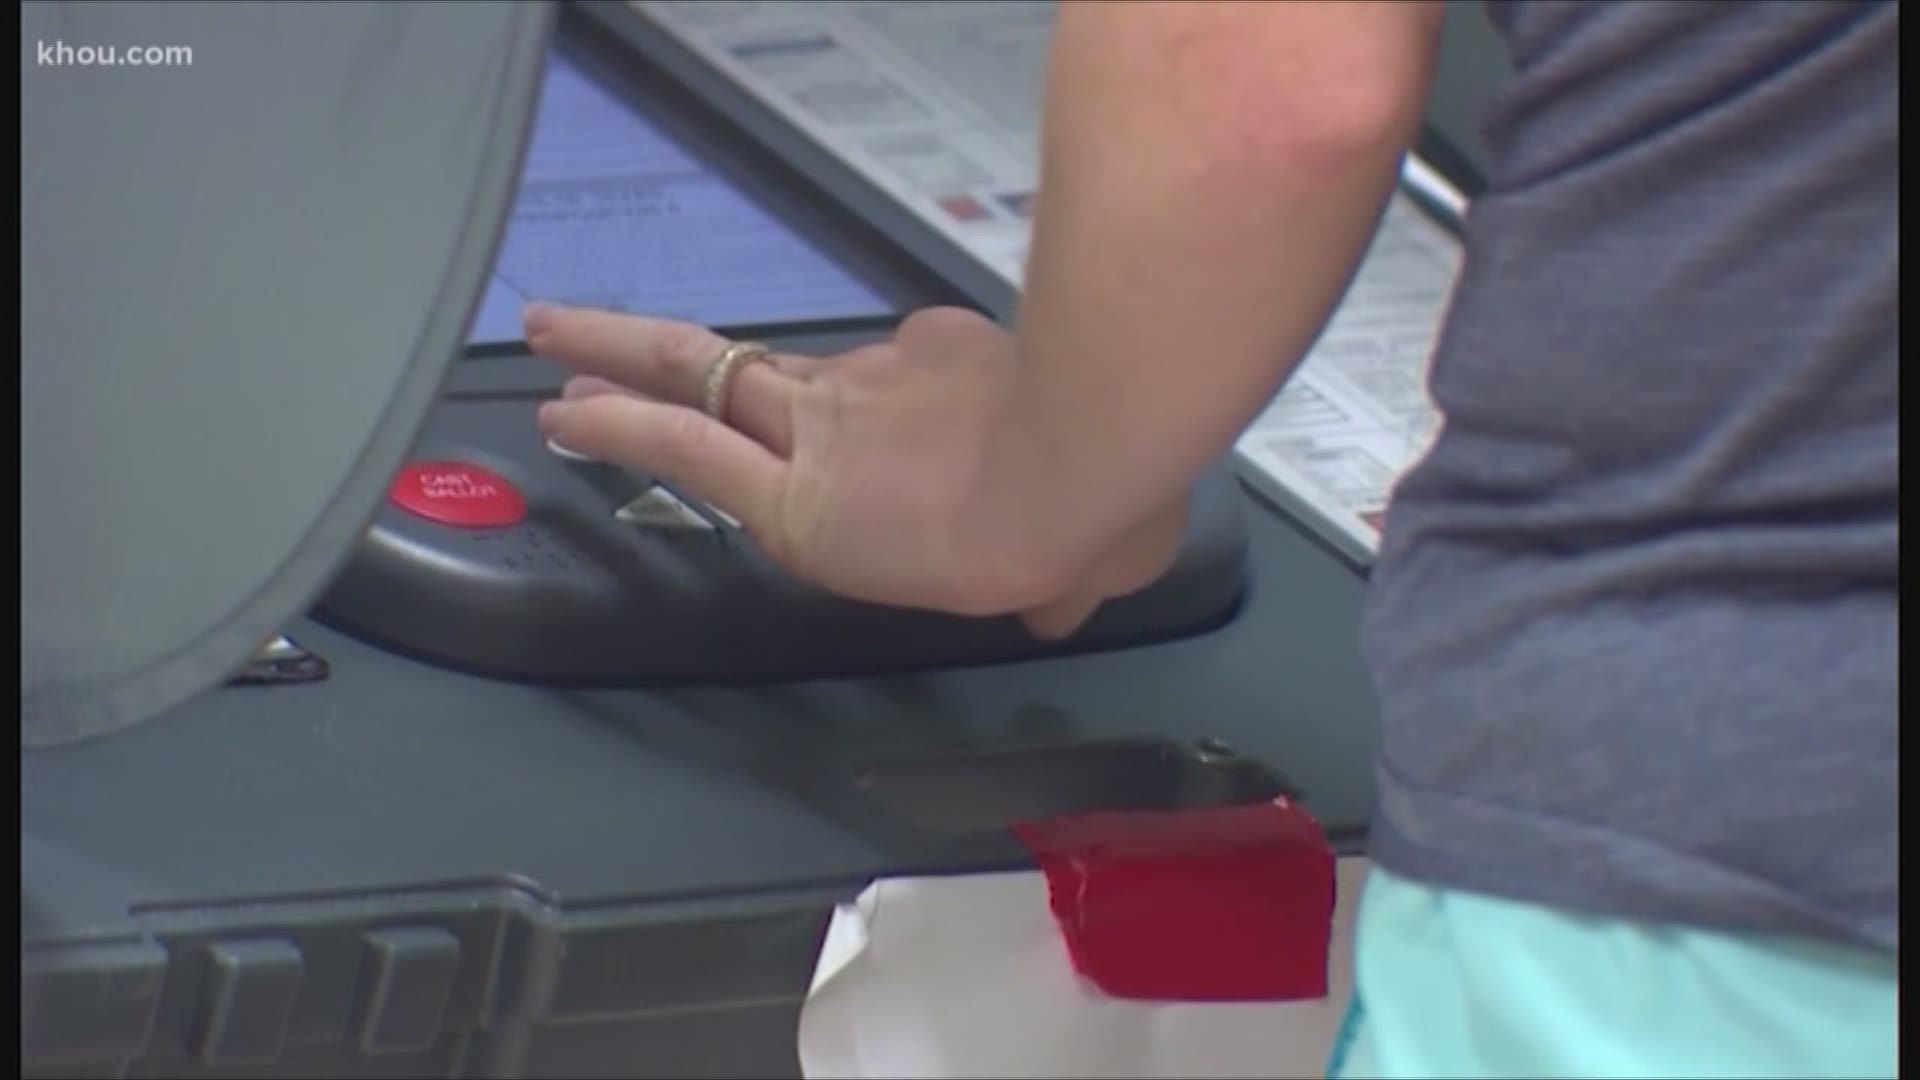 Several voters have reached out to KHOU reporting that when they vote straight ticket, their selections are being changed.